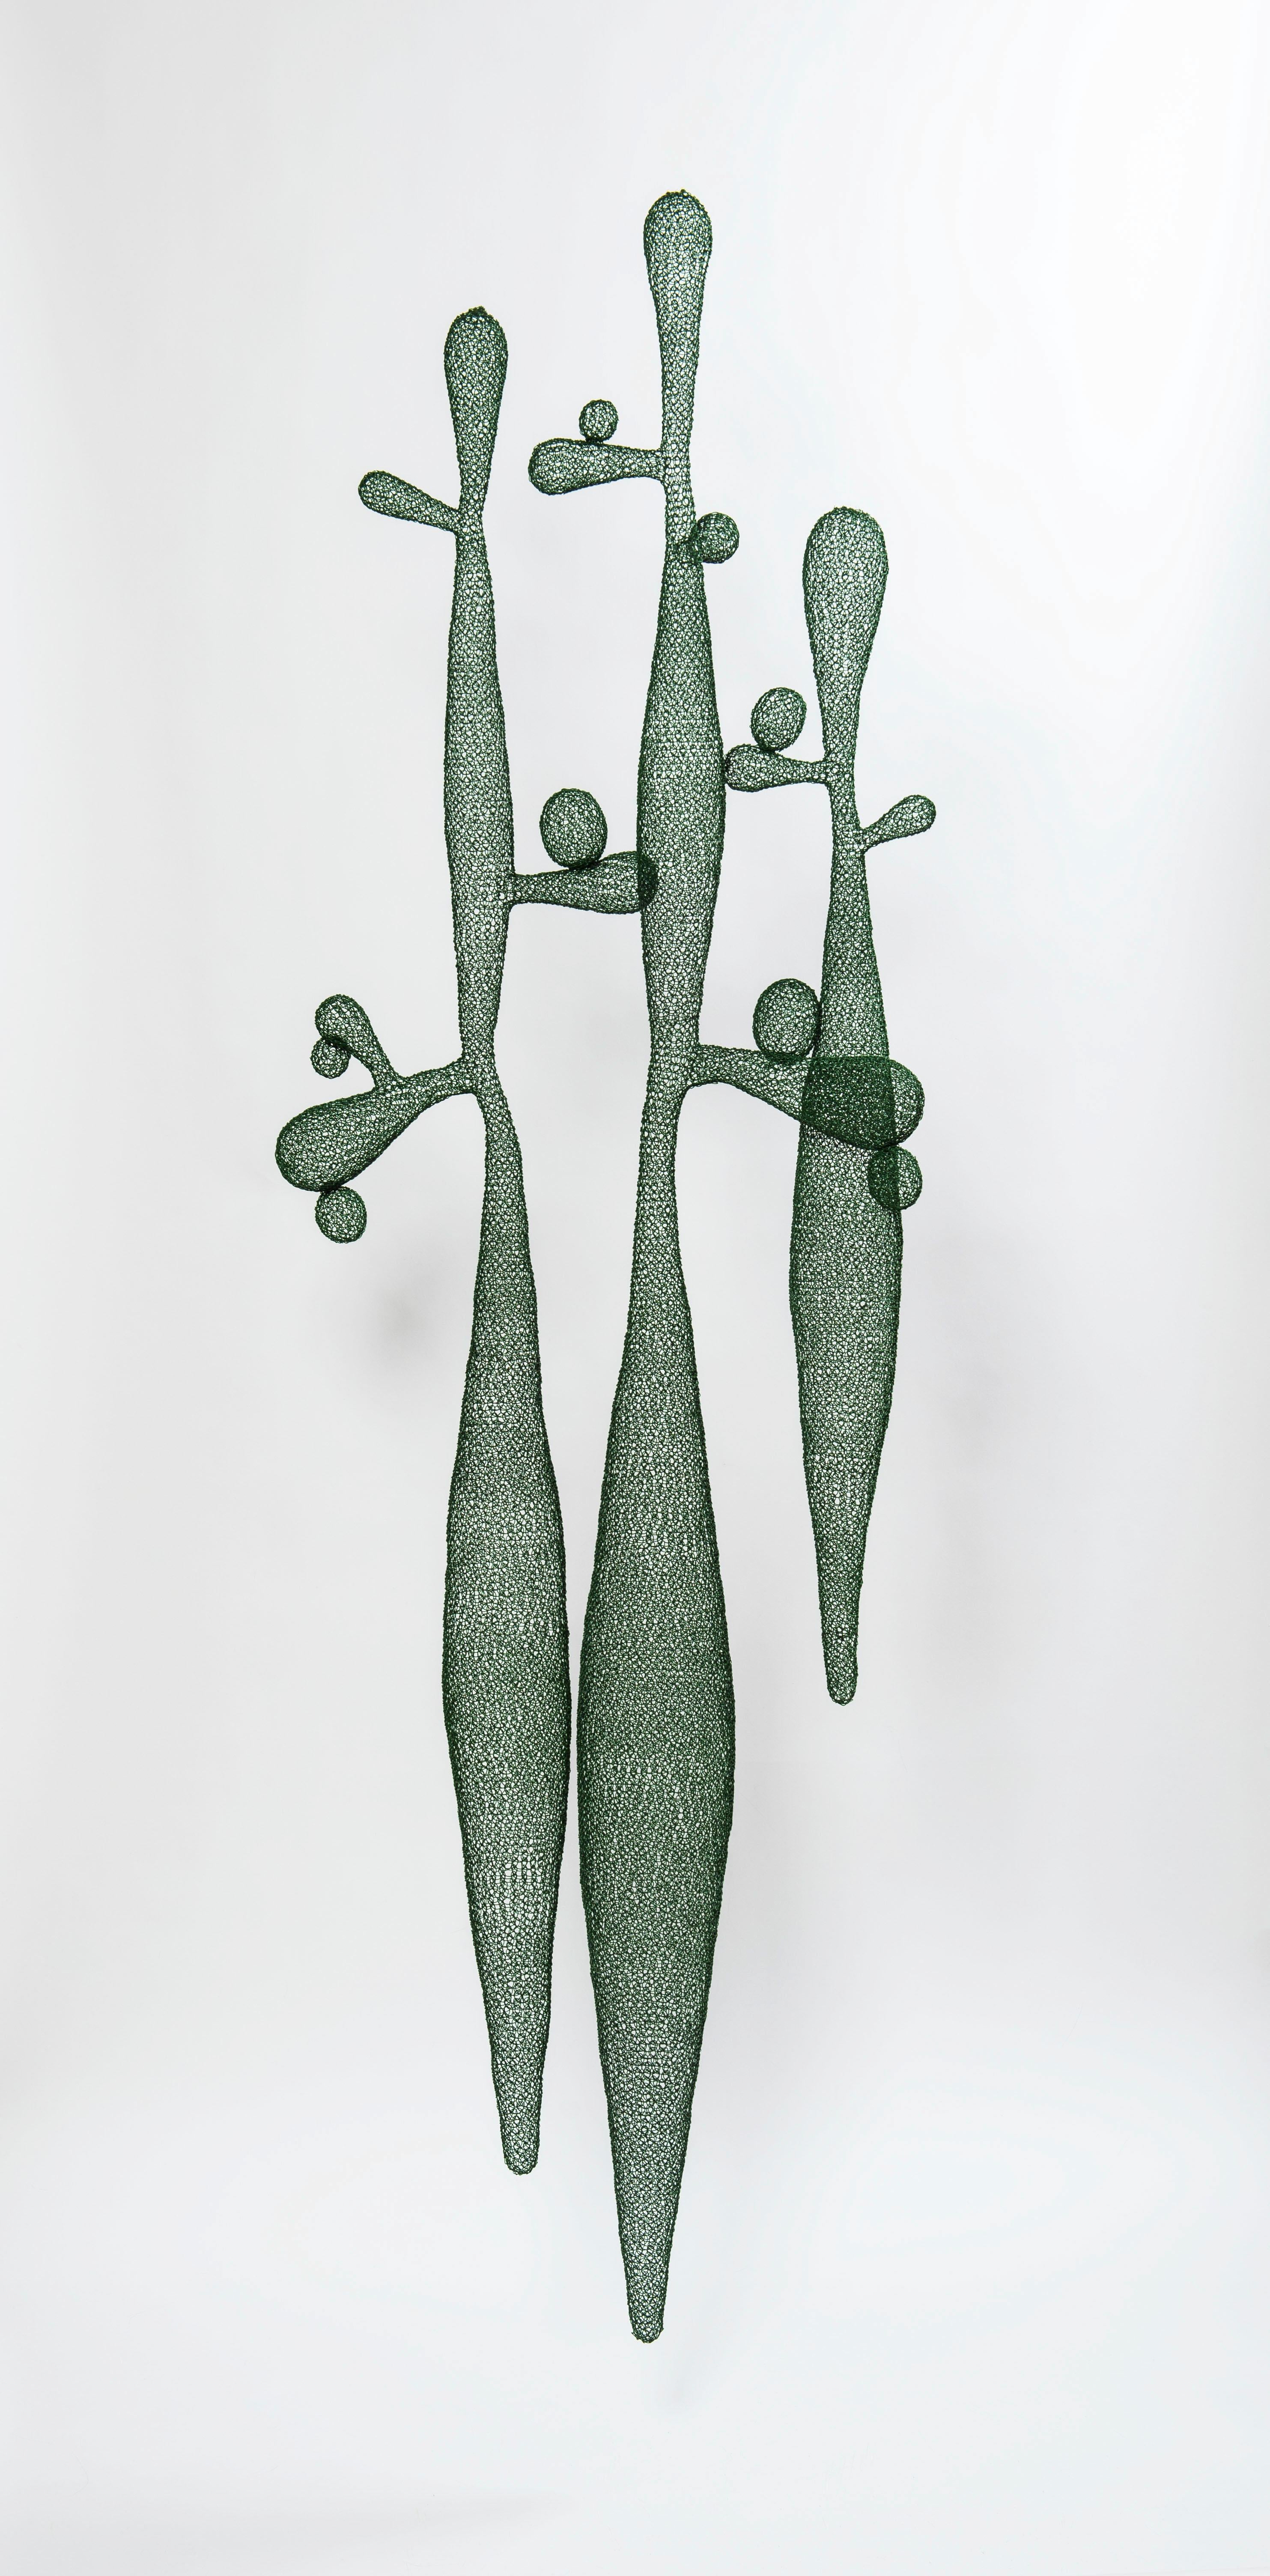 Delphine Grandvaux Abstract Sculpture - "3 Cactus", Hand Knitted Metallic Mesh Transparent Airy Wall-mounted Sculpture